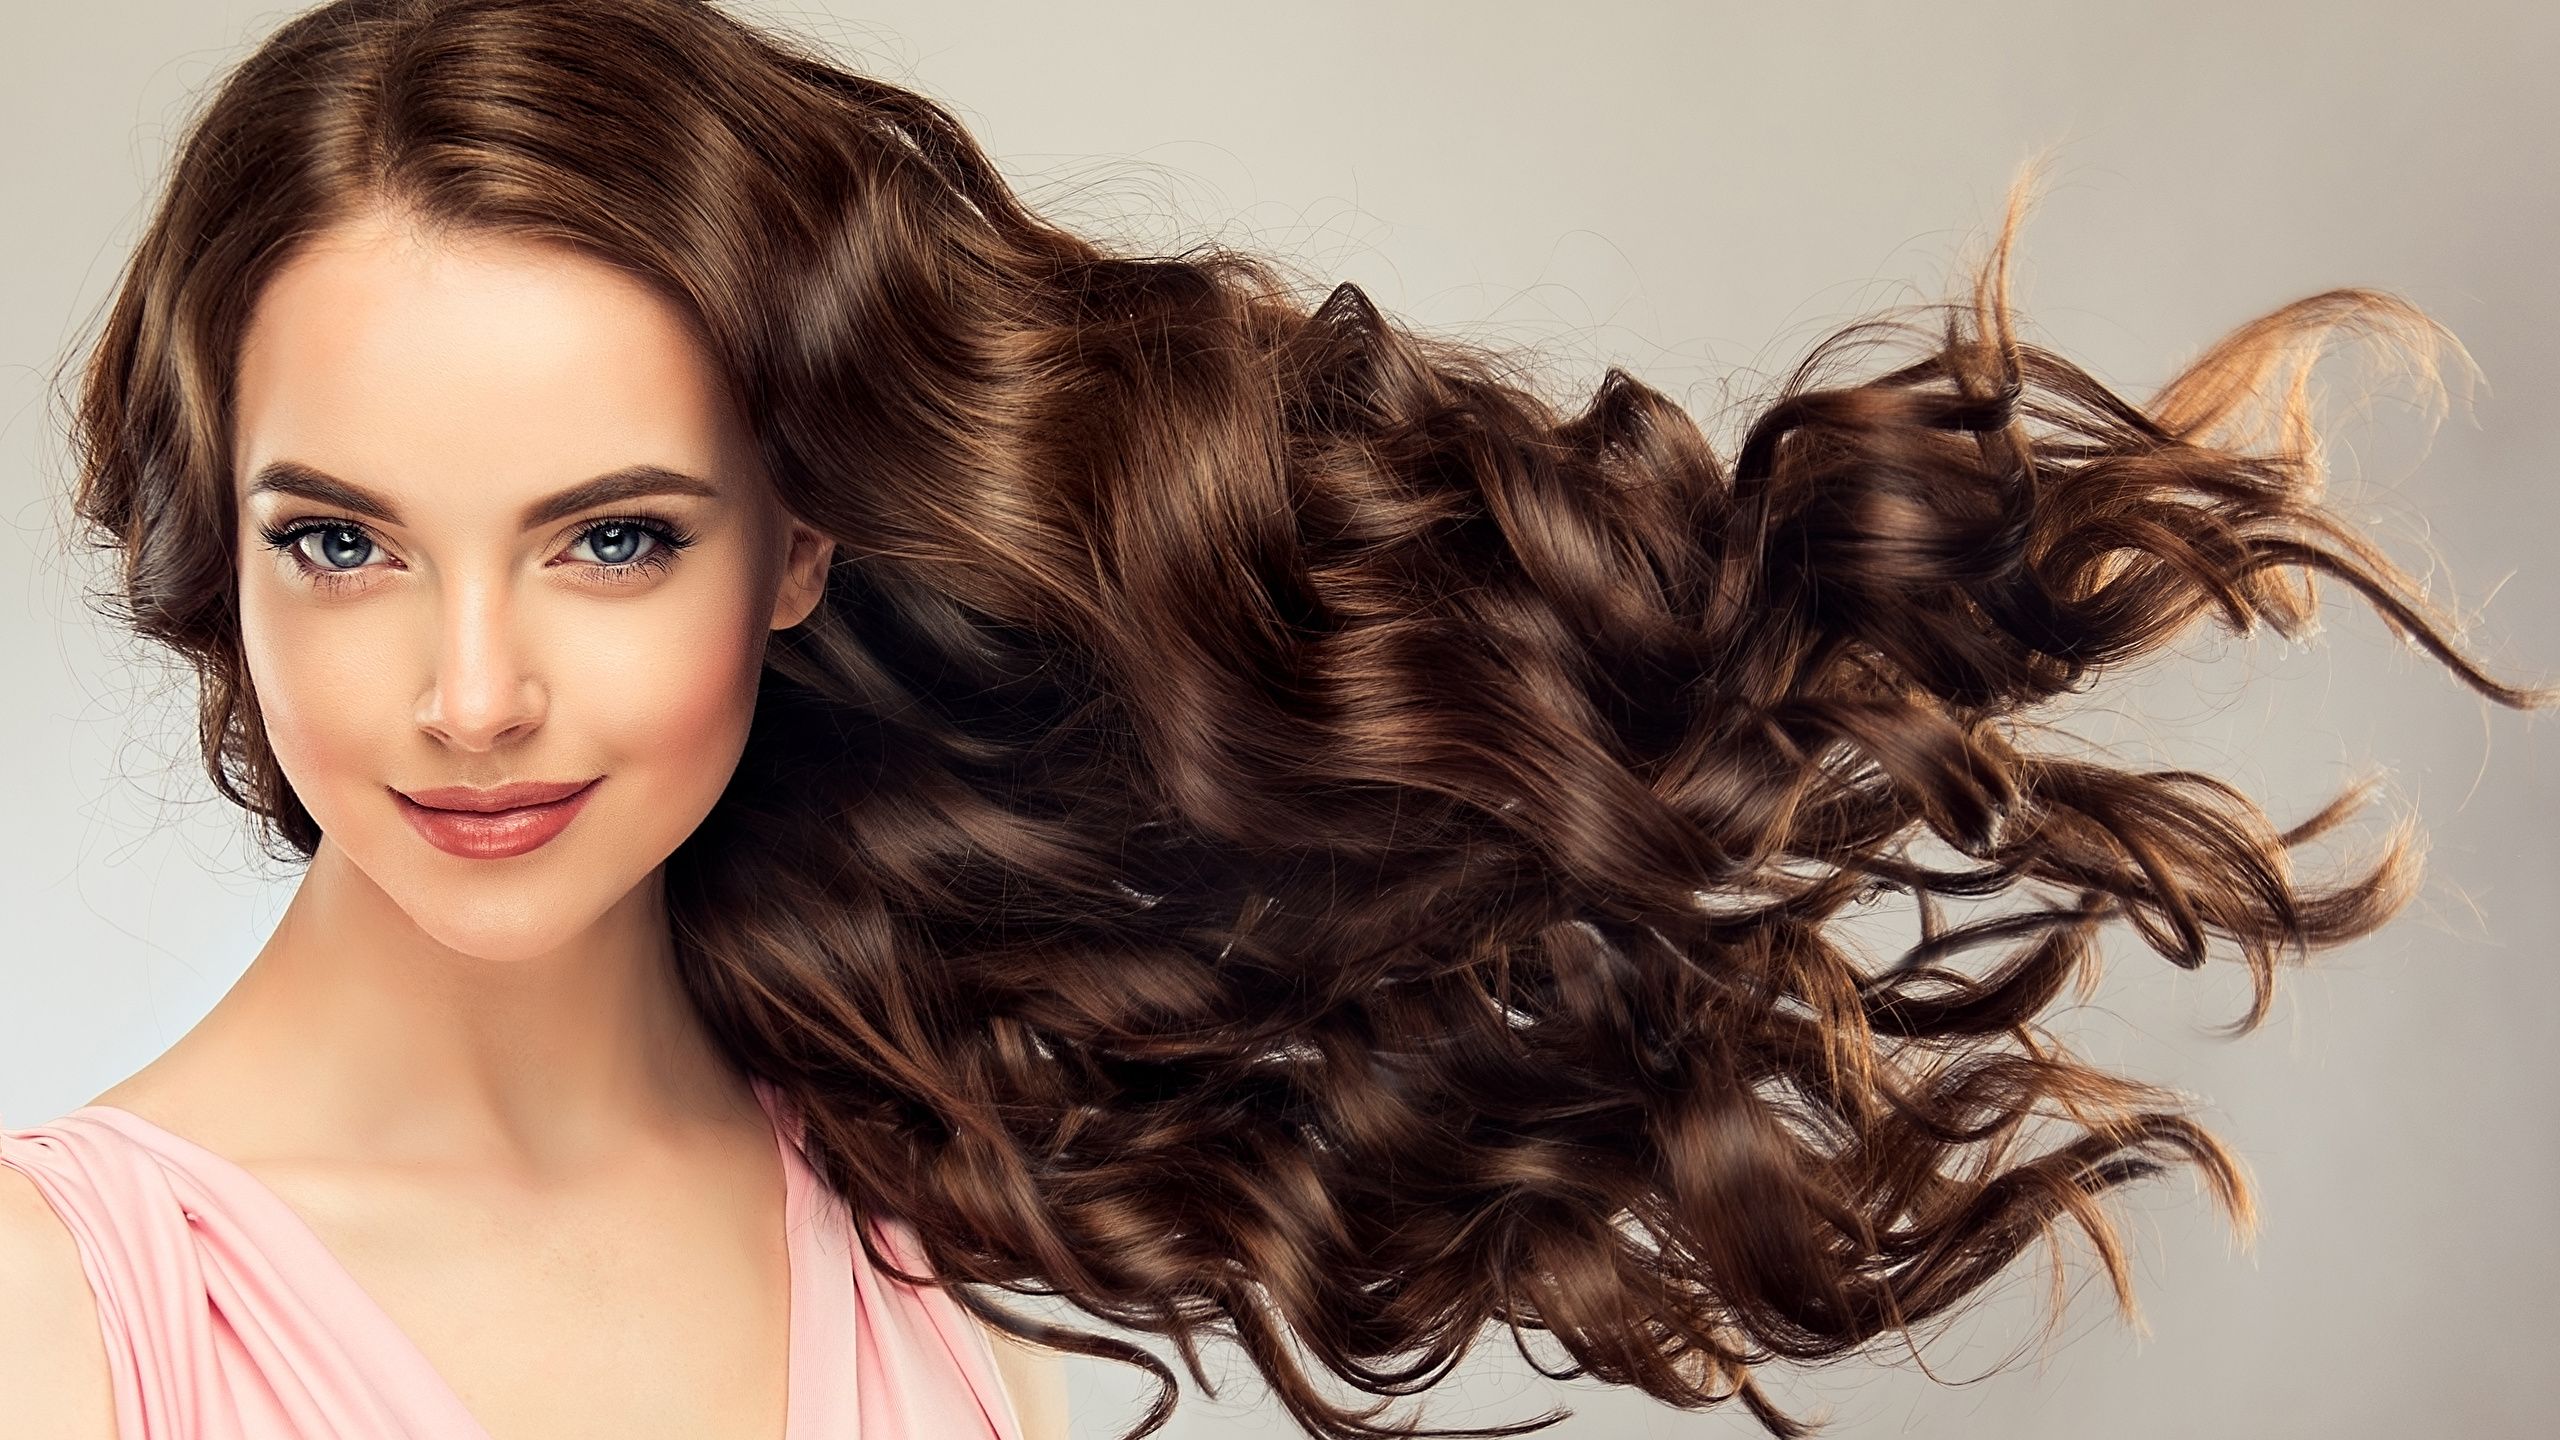 Image hairstyles curls Face Glance Brown haired Hair 2560x1440.